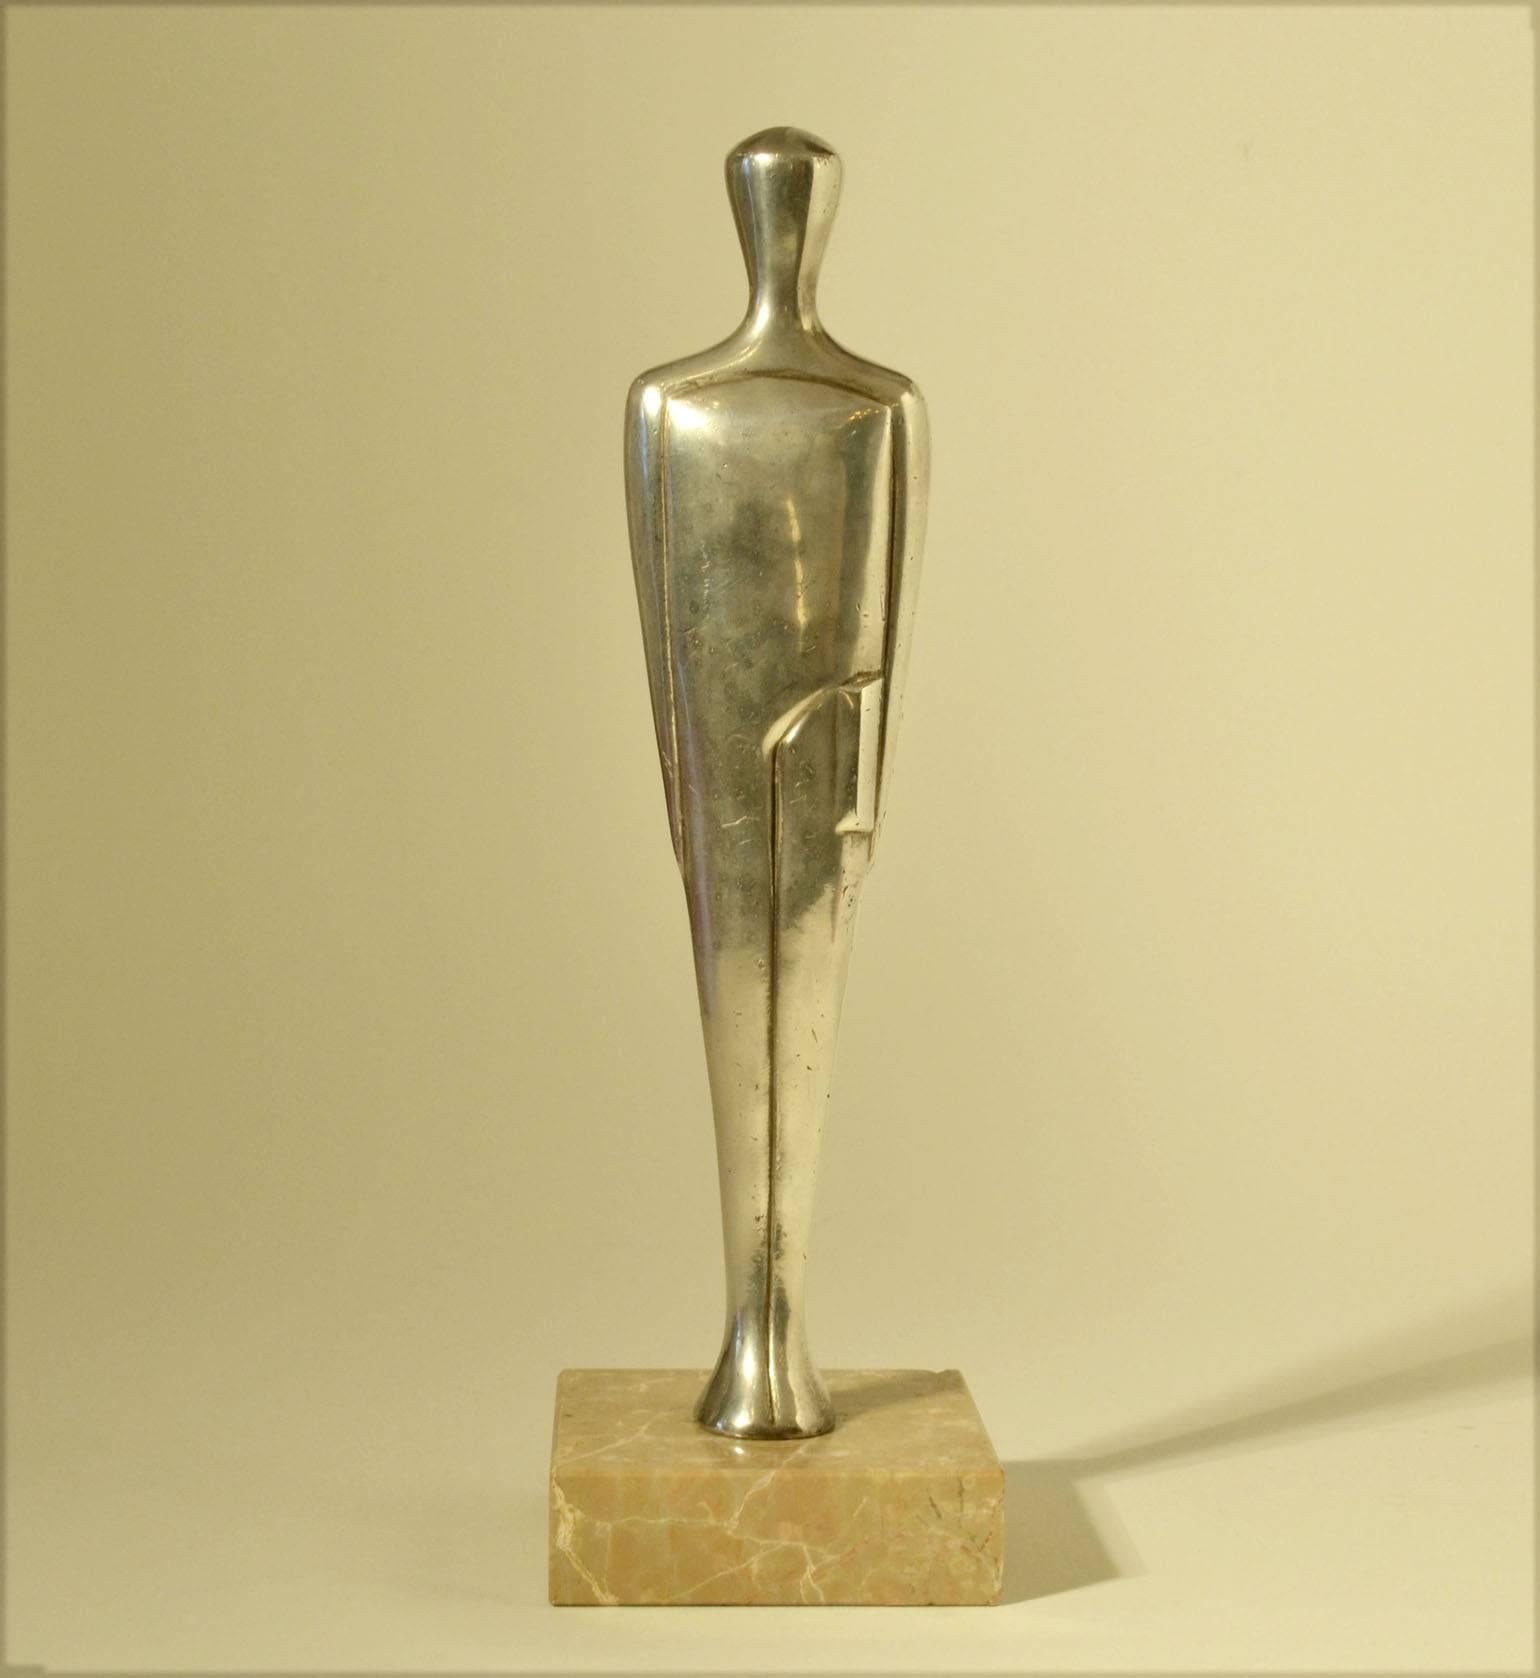 Abstract figure holding a script is cast in pewter and placed on a marble base. It is designed by the artist E. W. Lane. This Oscar type sculpture is designed around the same time as the 'real' gold-plated Oscar by Gibbons in 1938. During the same